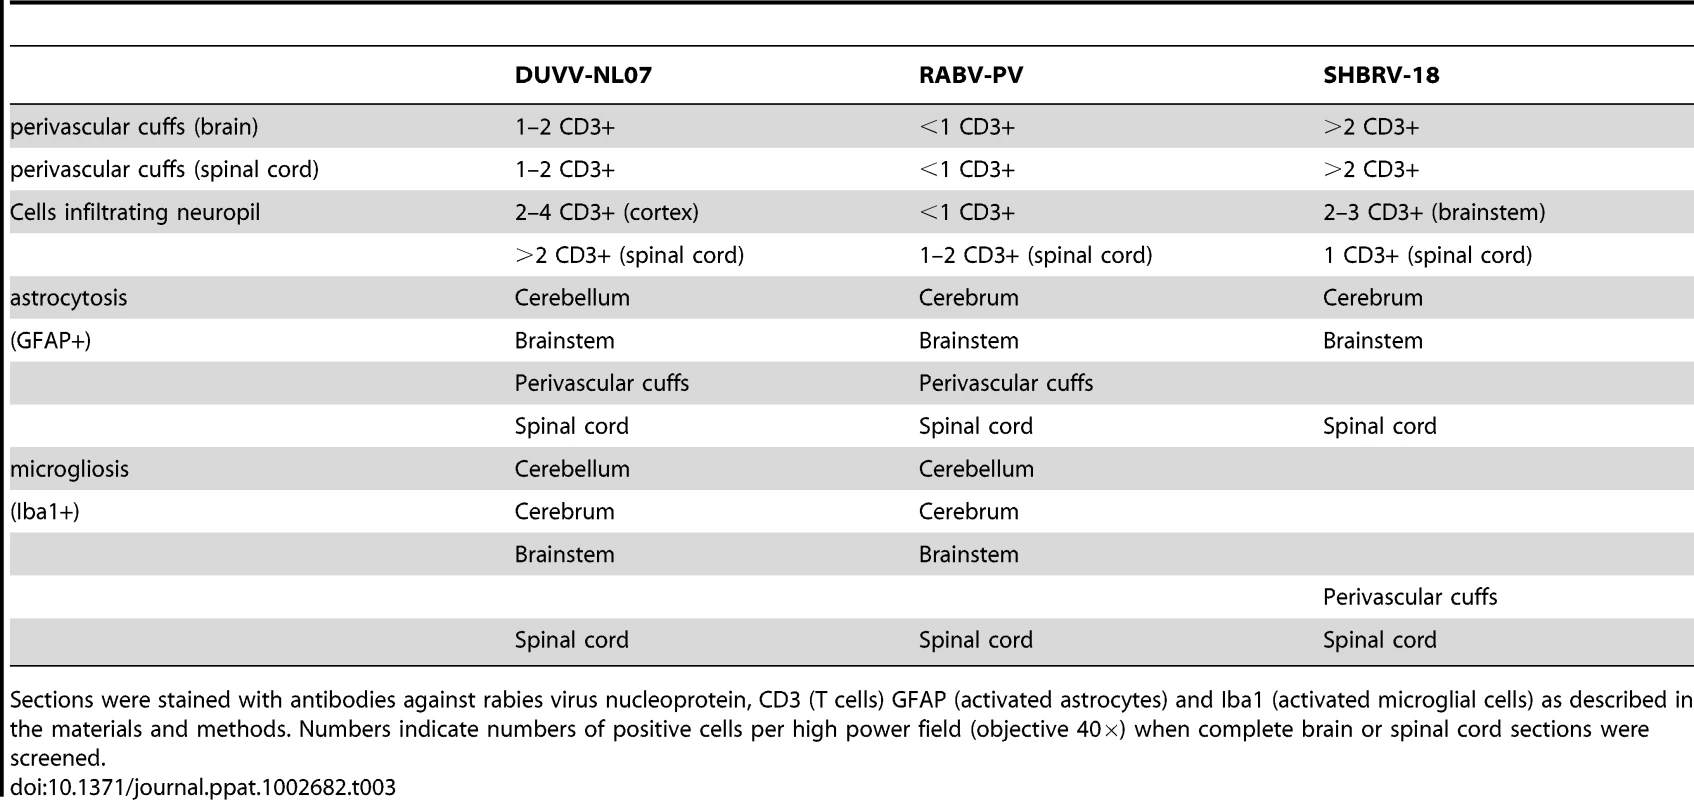 Overview of histopathological changes observed in the brain and spinal cord of animals infected with DUVV-NL07, RABV-PV or SHBRV-18 virus at the time of paralysis.